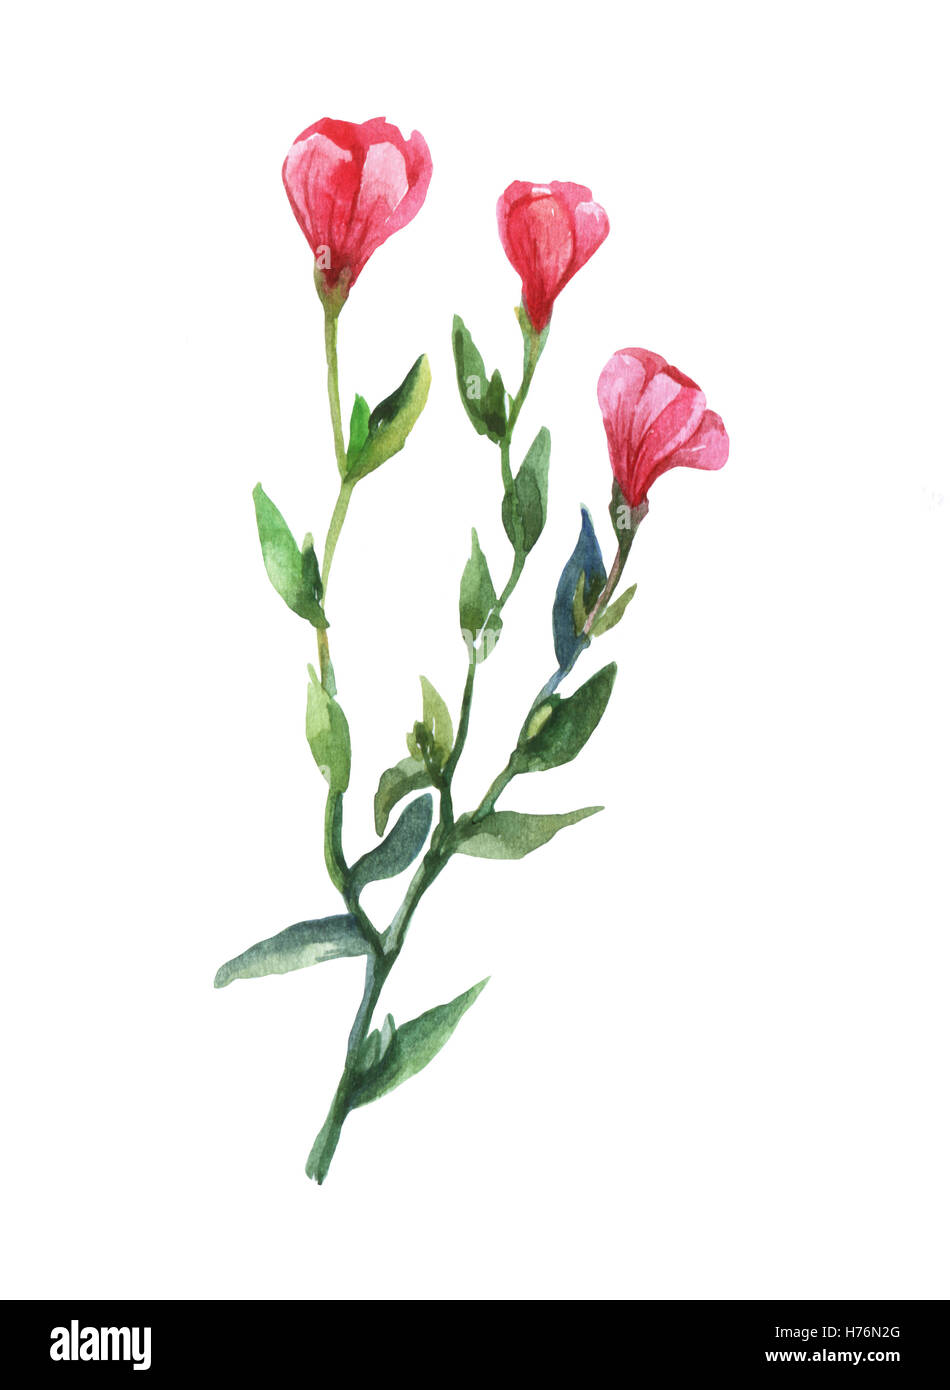 Red Lein, flowering flax, red flax, scarlet flax, crimson flax(Linum grandiflorum). Watercolor illustration on white background. Stock Photo